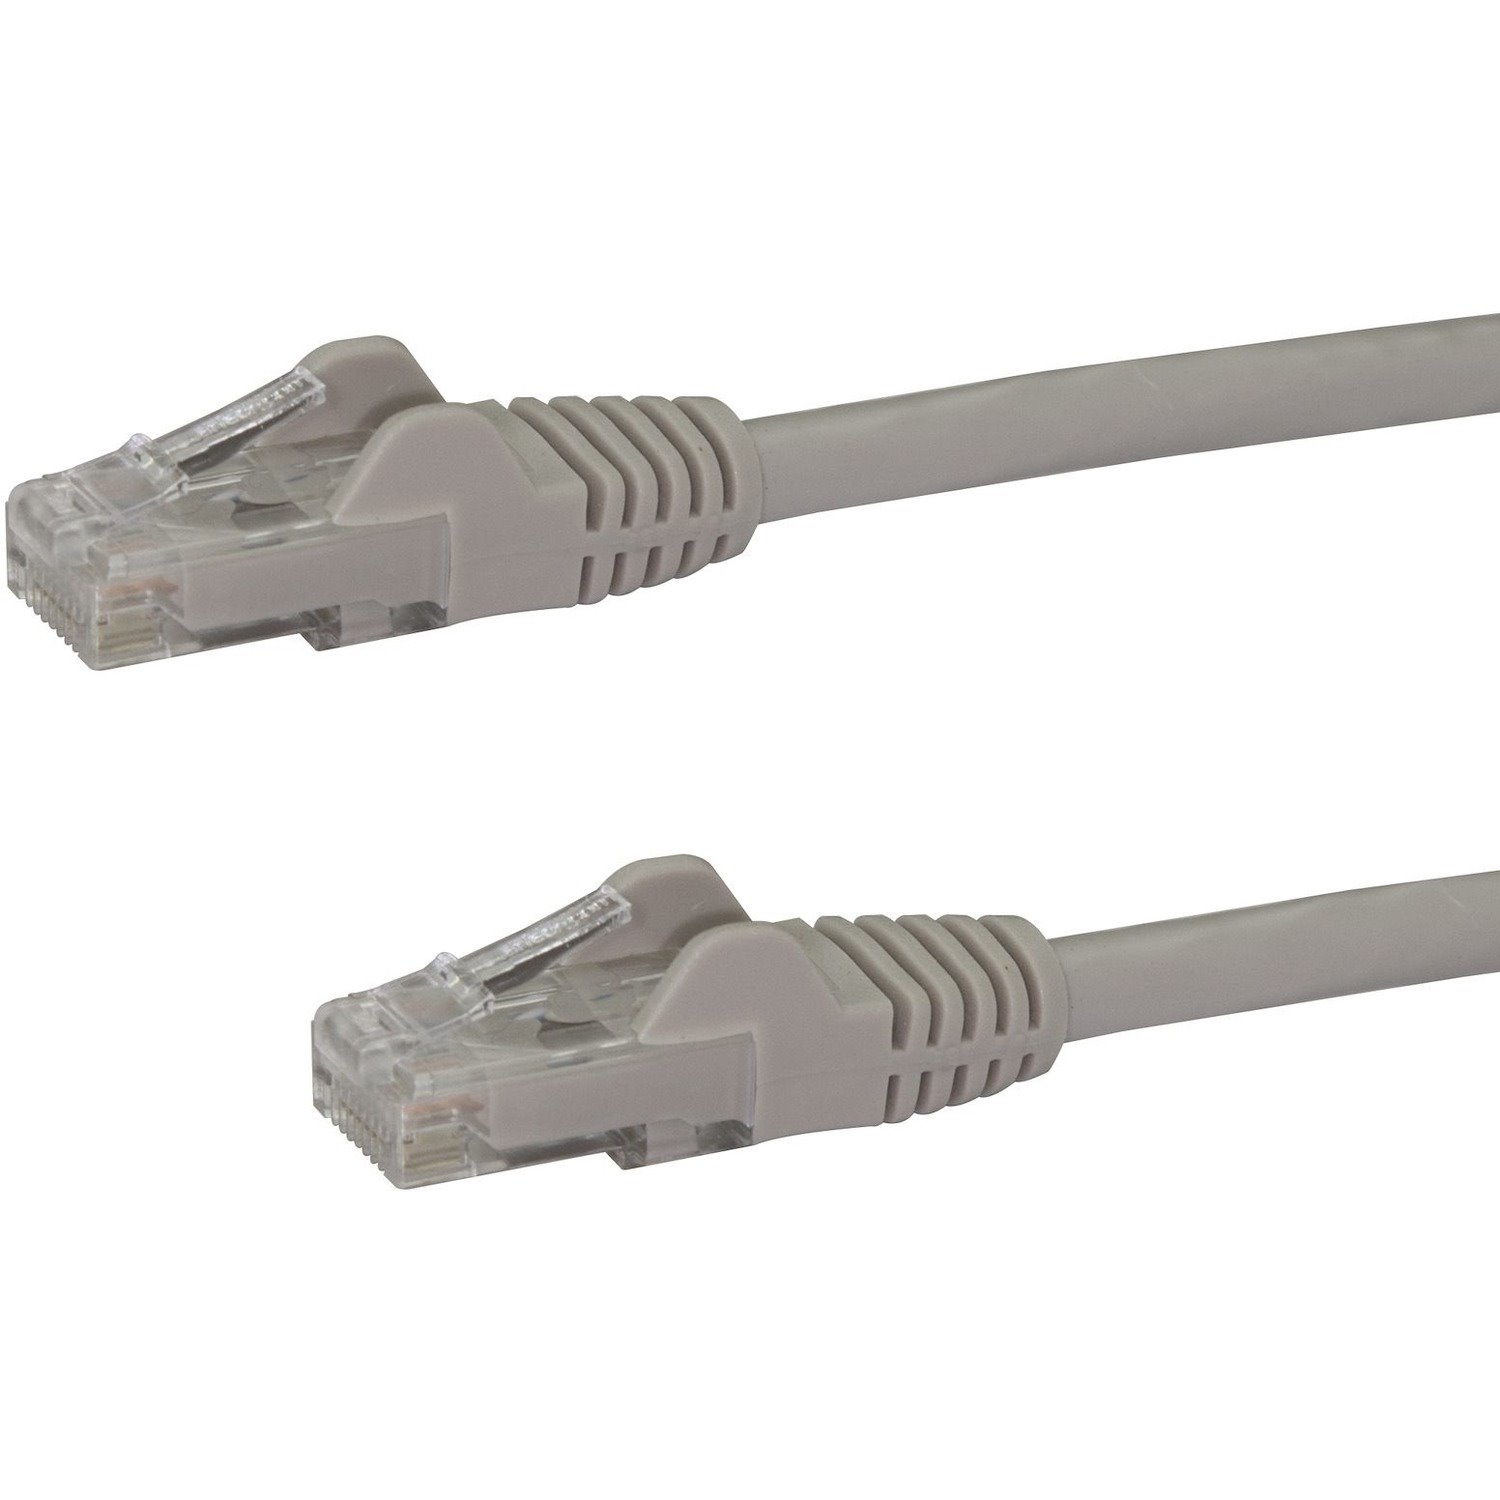 StarTech.com 1 m Category 6 Network Cable for Network Device - 1